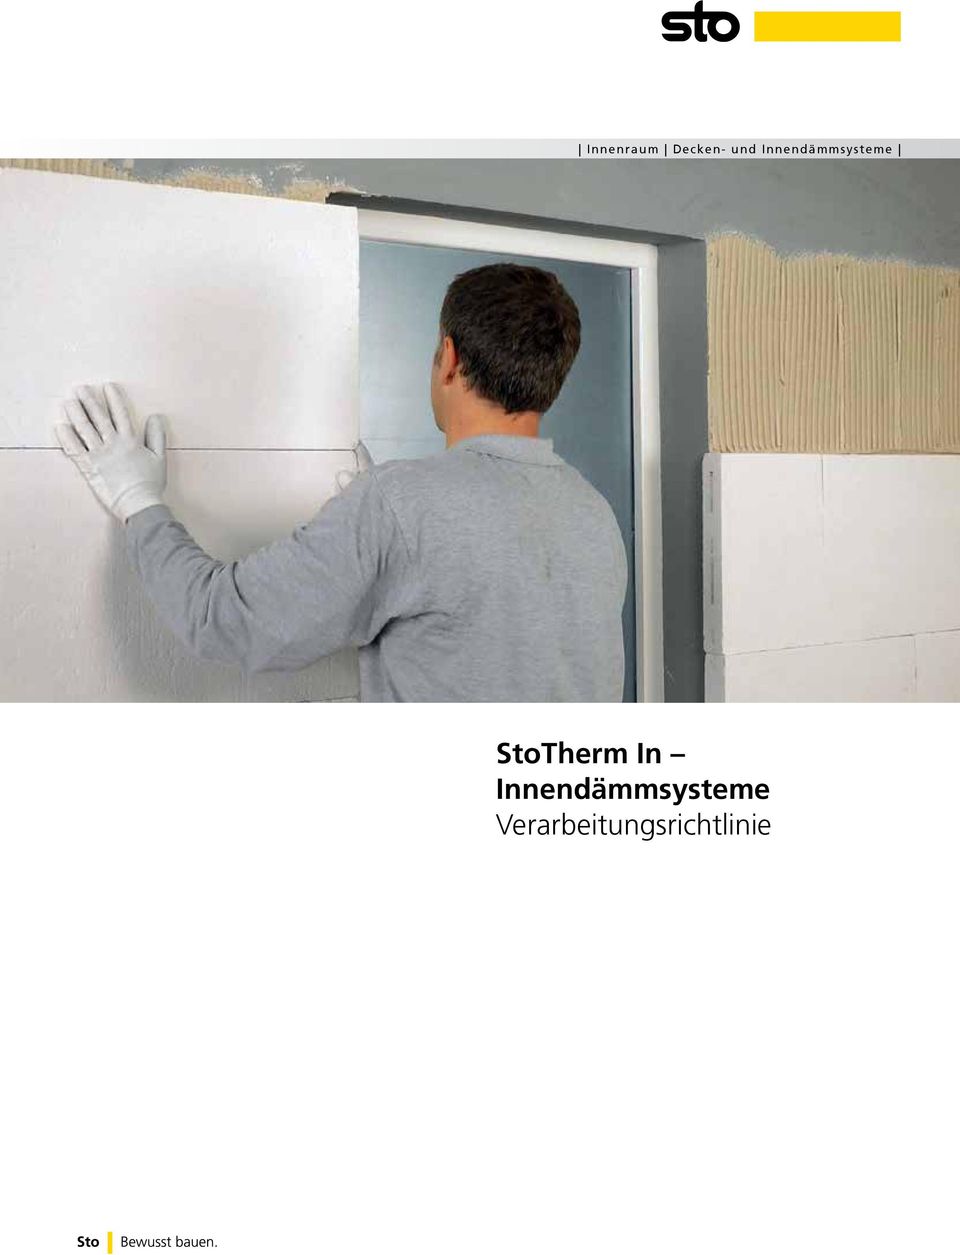 StoTherm In 